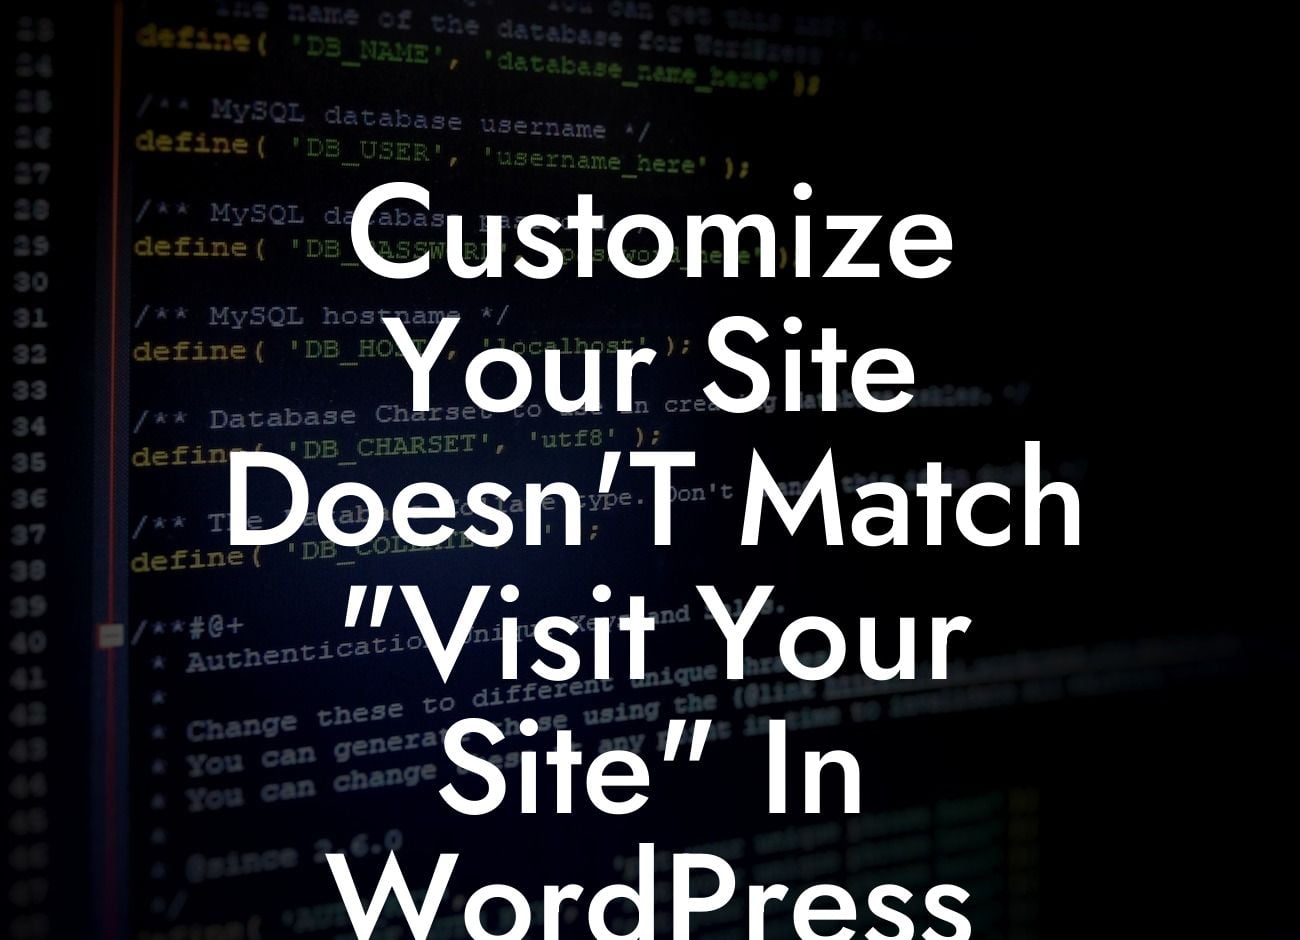 Customize Your Site Doesn'T Match "Visit Your Site" In WordPress